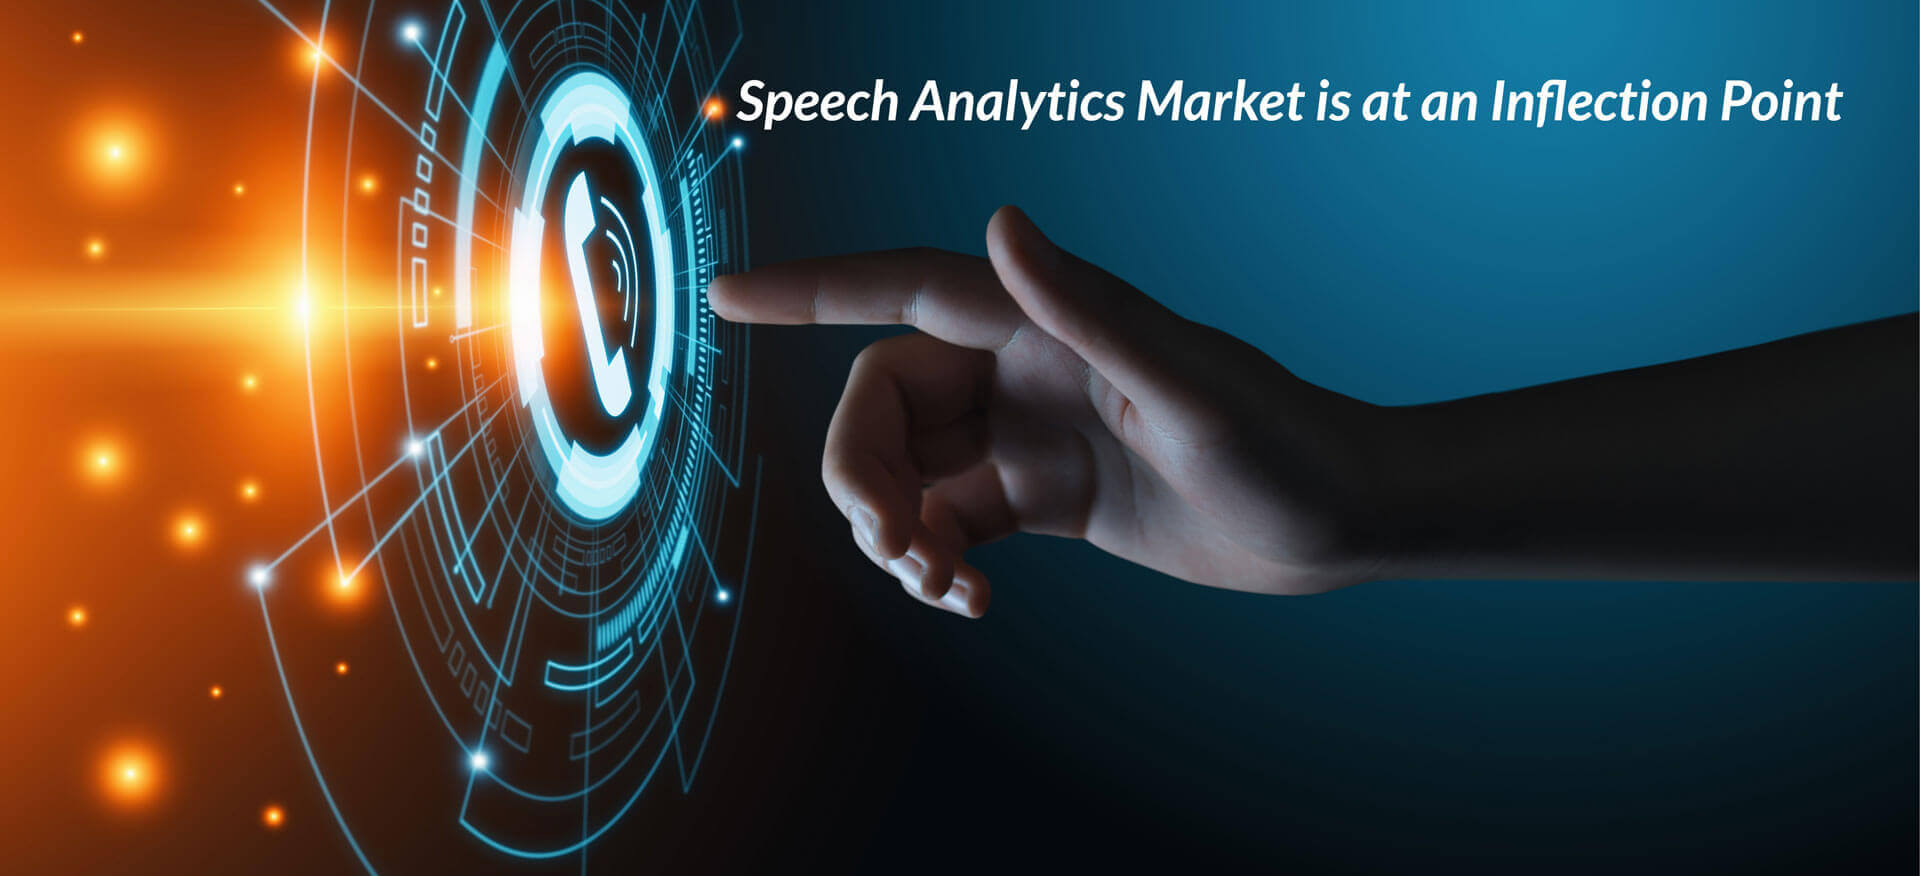 Speech Analytics Market is at inflection Point